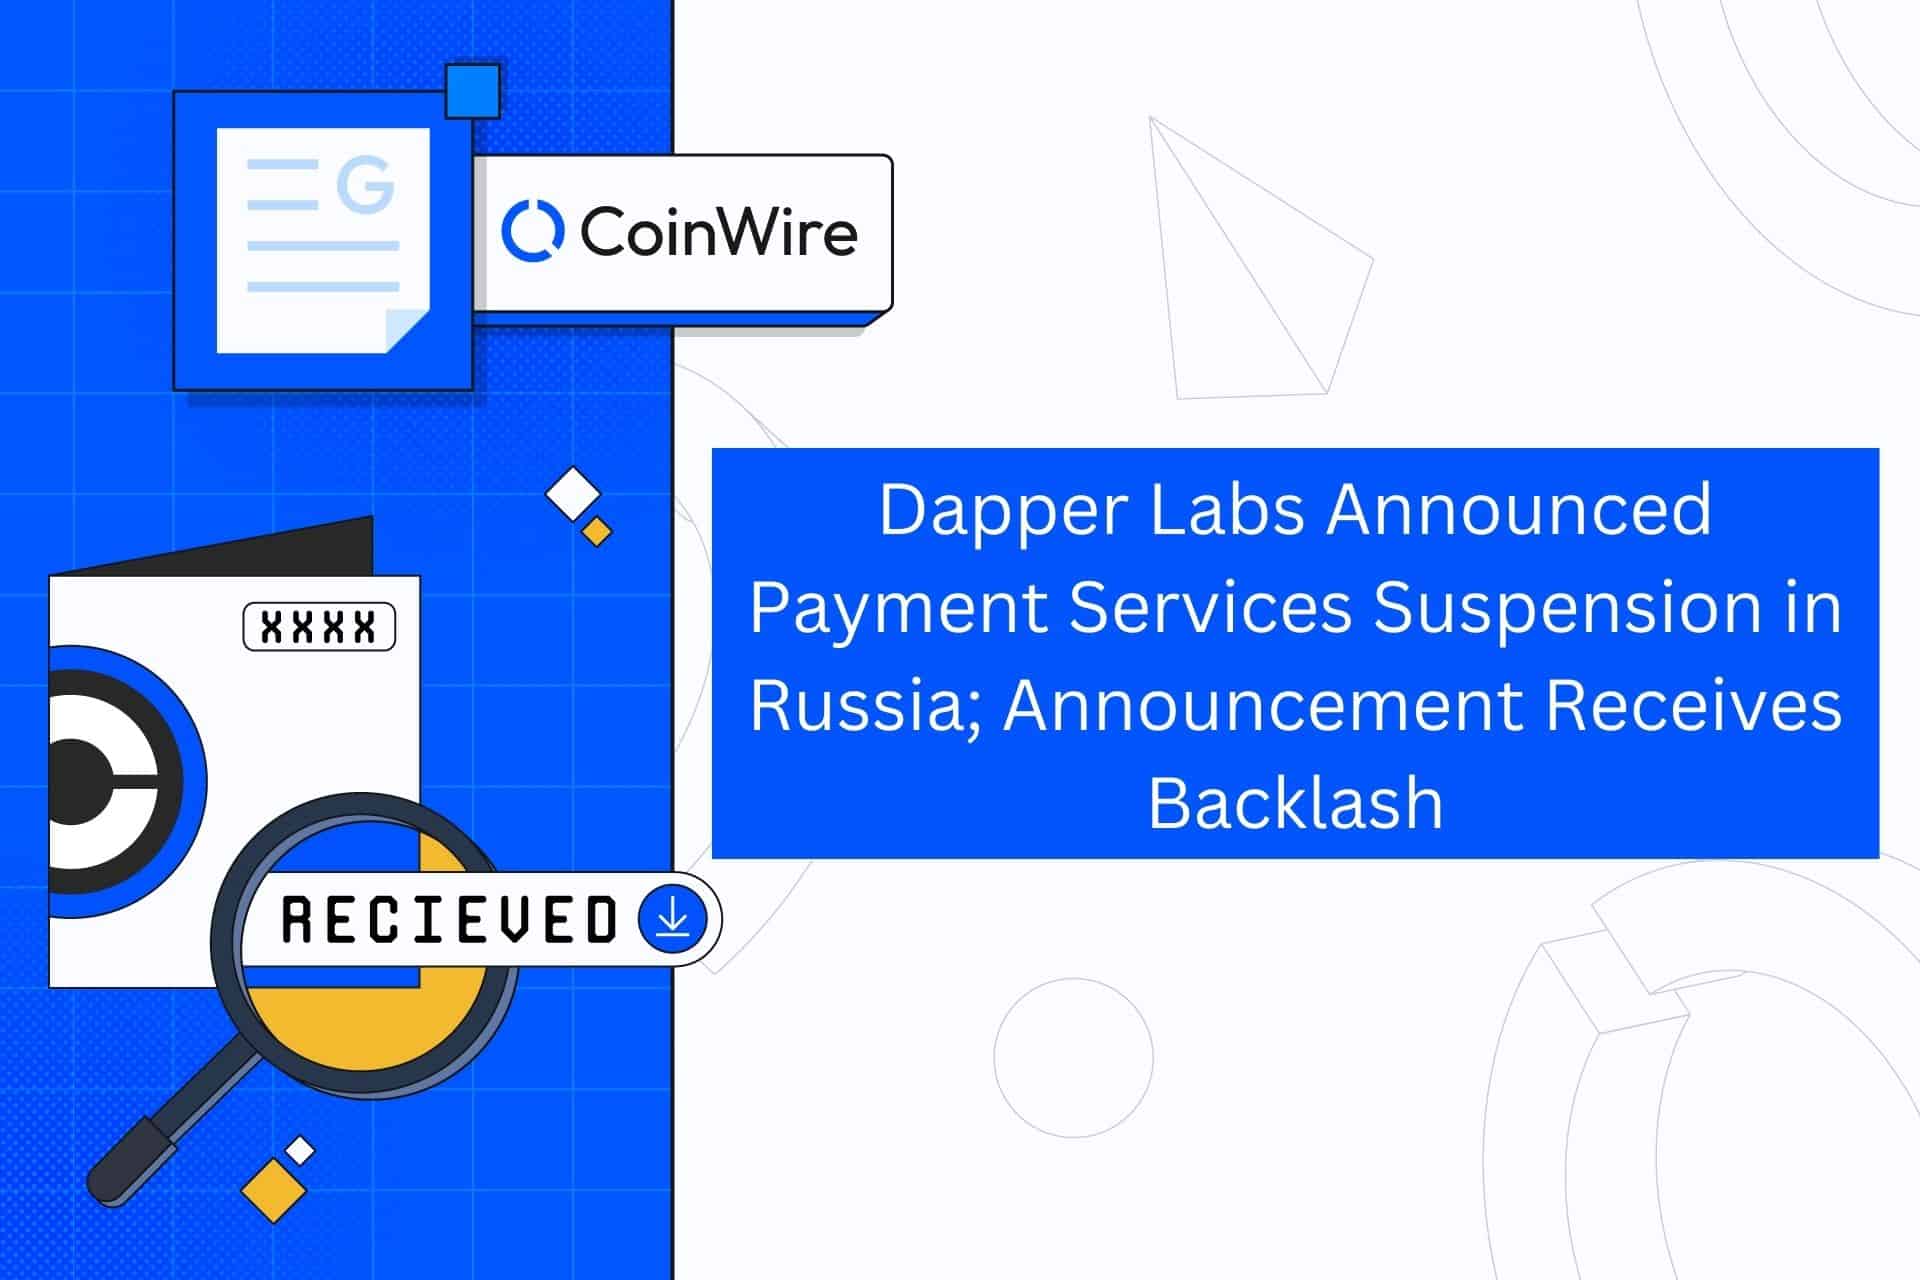 Dapper Labs Announced Payment Services Suspension In Russia; Announcement Receives Backlash